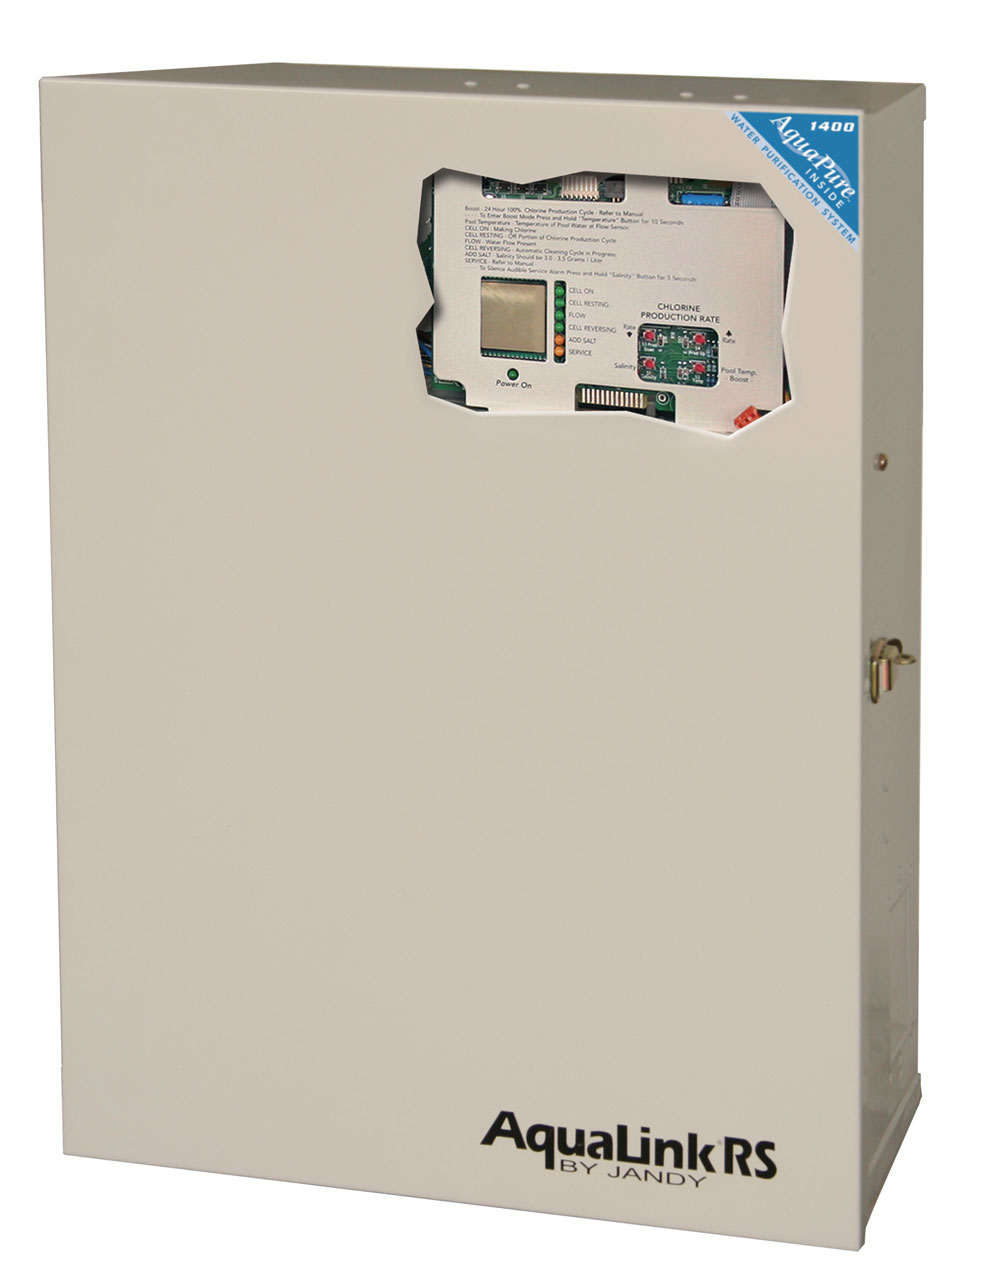 AquaLink RS Pool & Spa Automation System Jandy